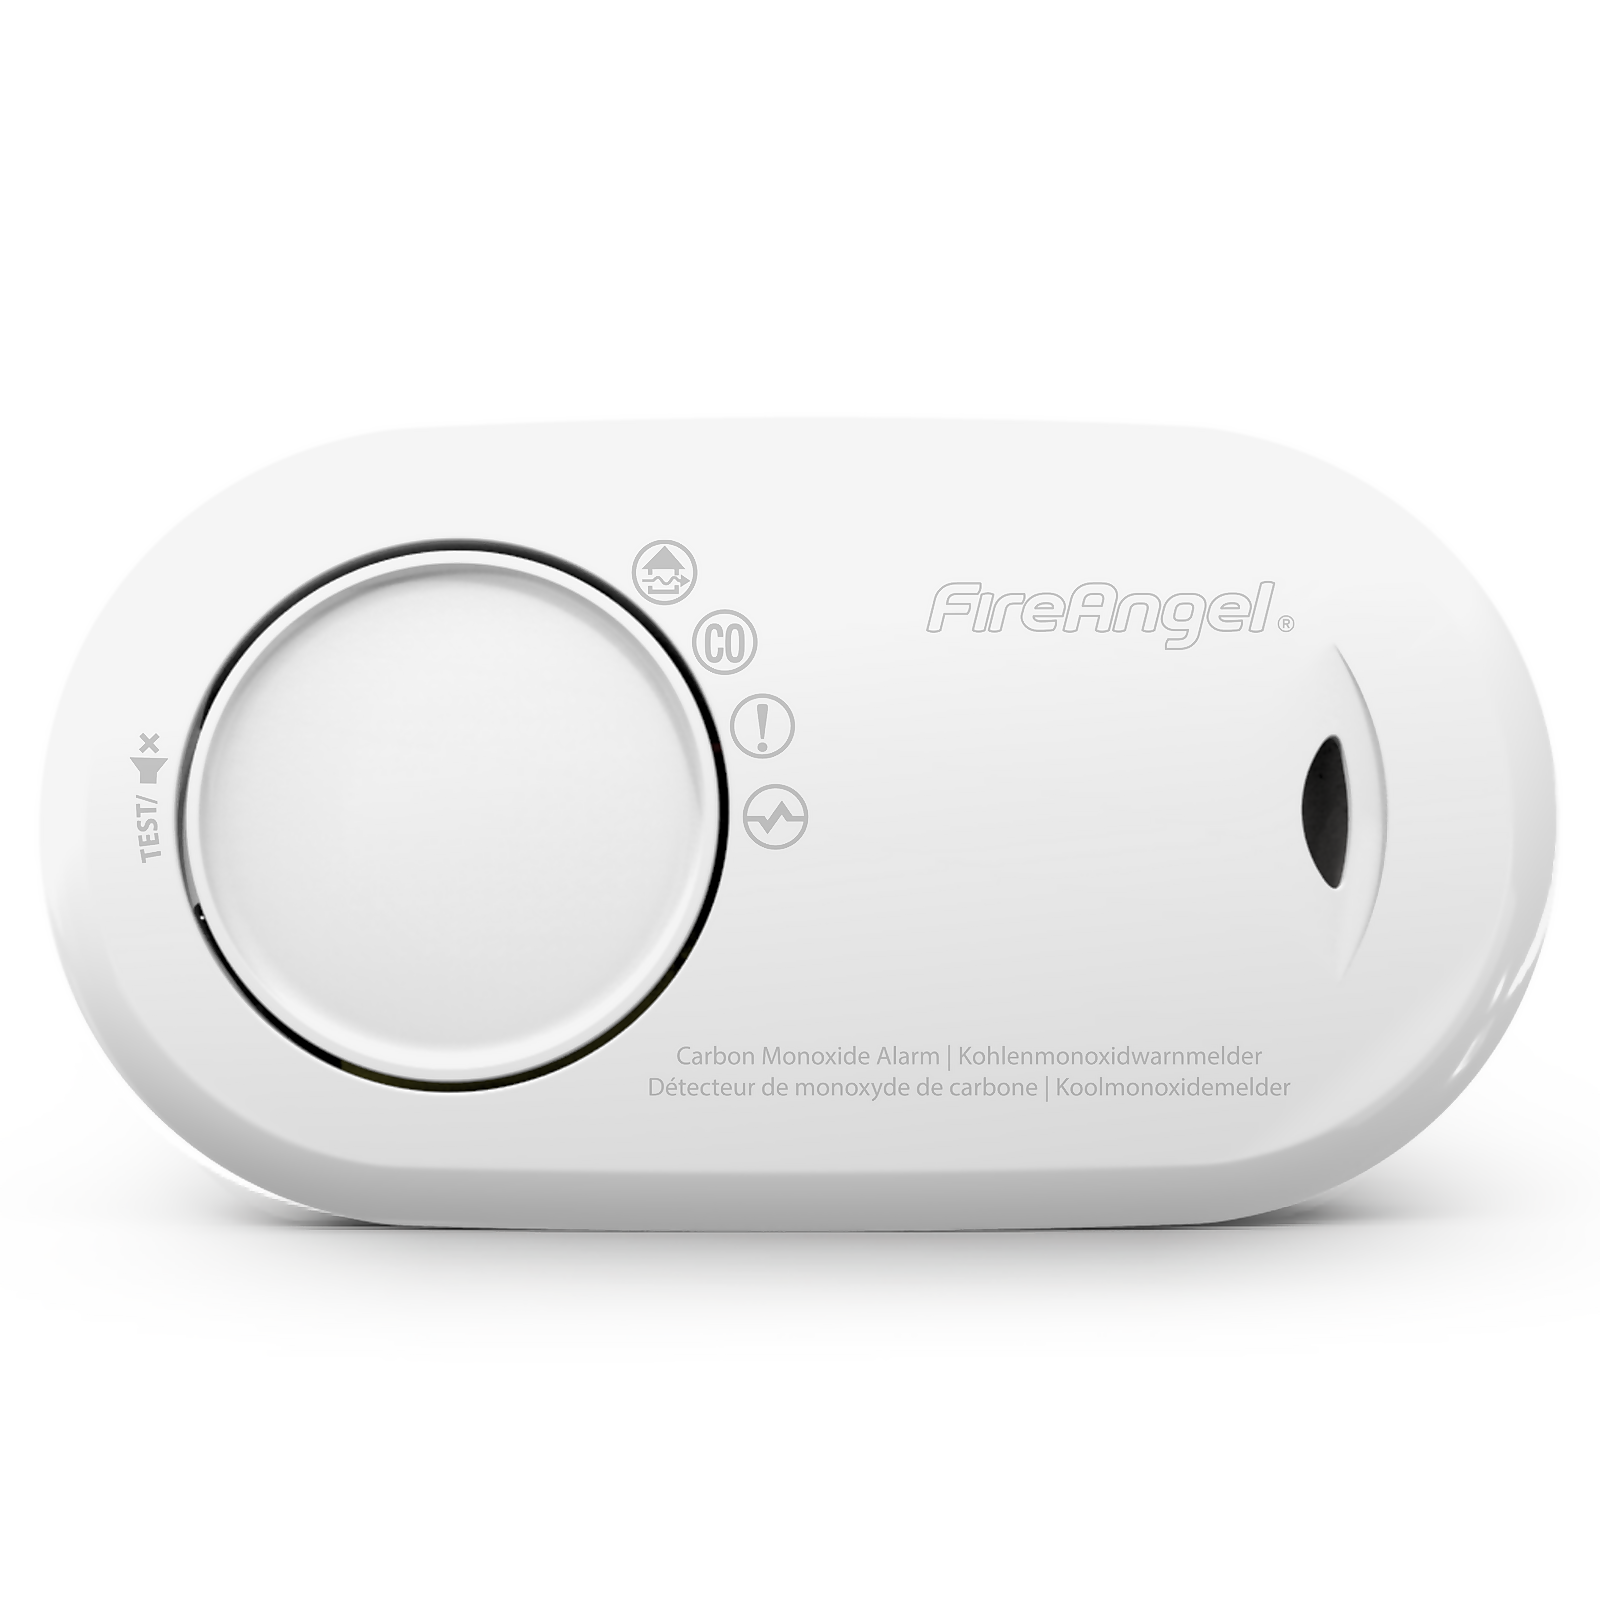 FireAngel Carbon Monoxide Alarm with 10 Year Sealed For Life Battery